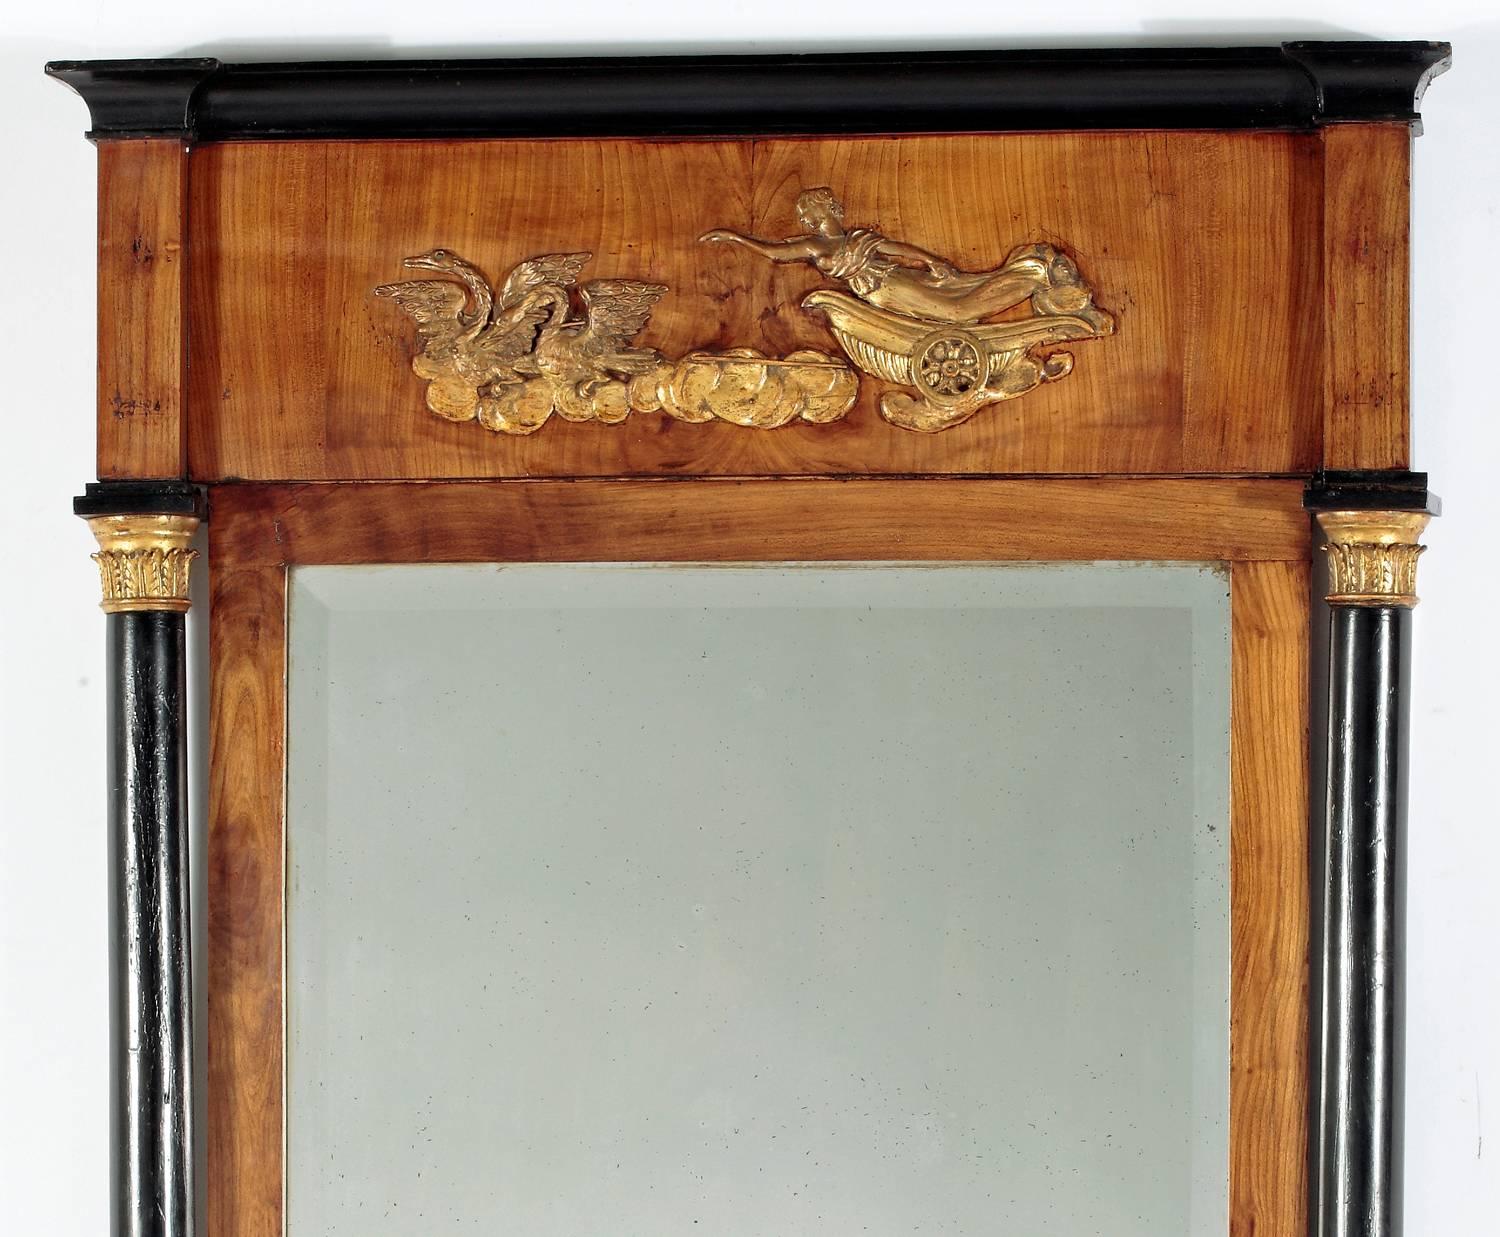 A Fruitwood & Ebonized Parcel Gilt 
Neoclassical Pier Mirror
Circa 1800

Height 67 in.  Width 33 in.

Provenance:
Property of a Gentleman Boston Ma.

Mir30